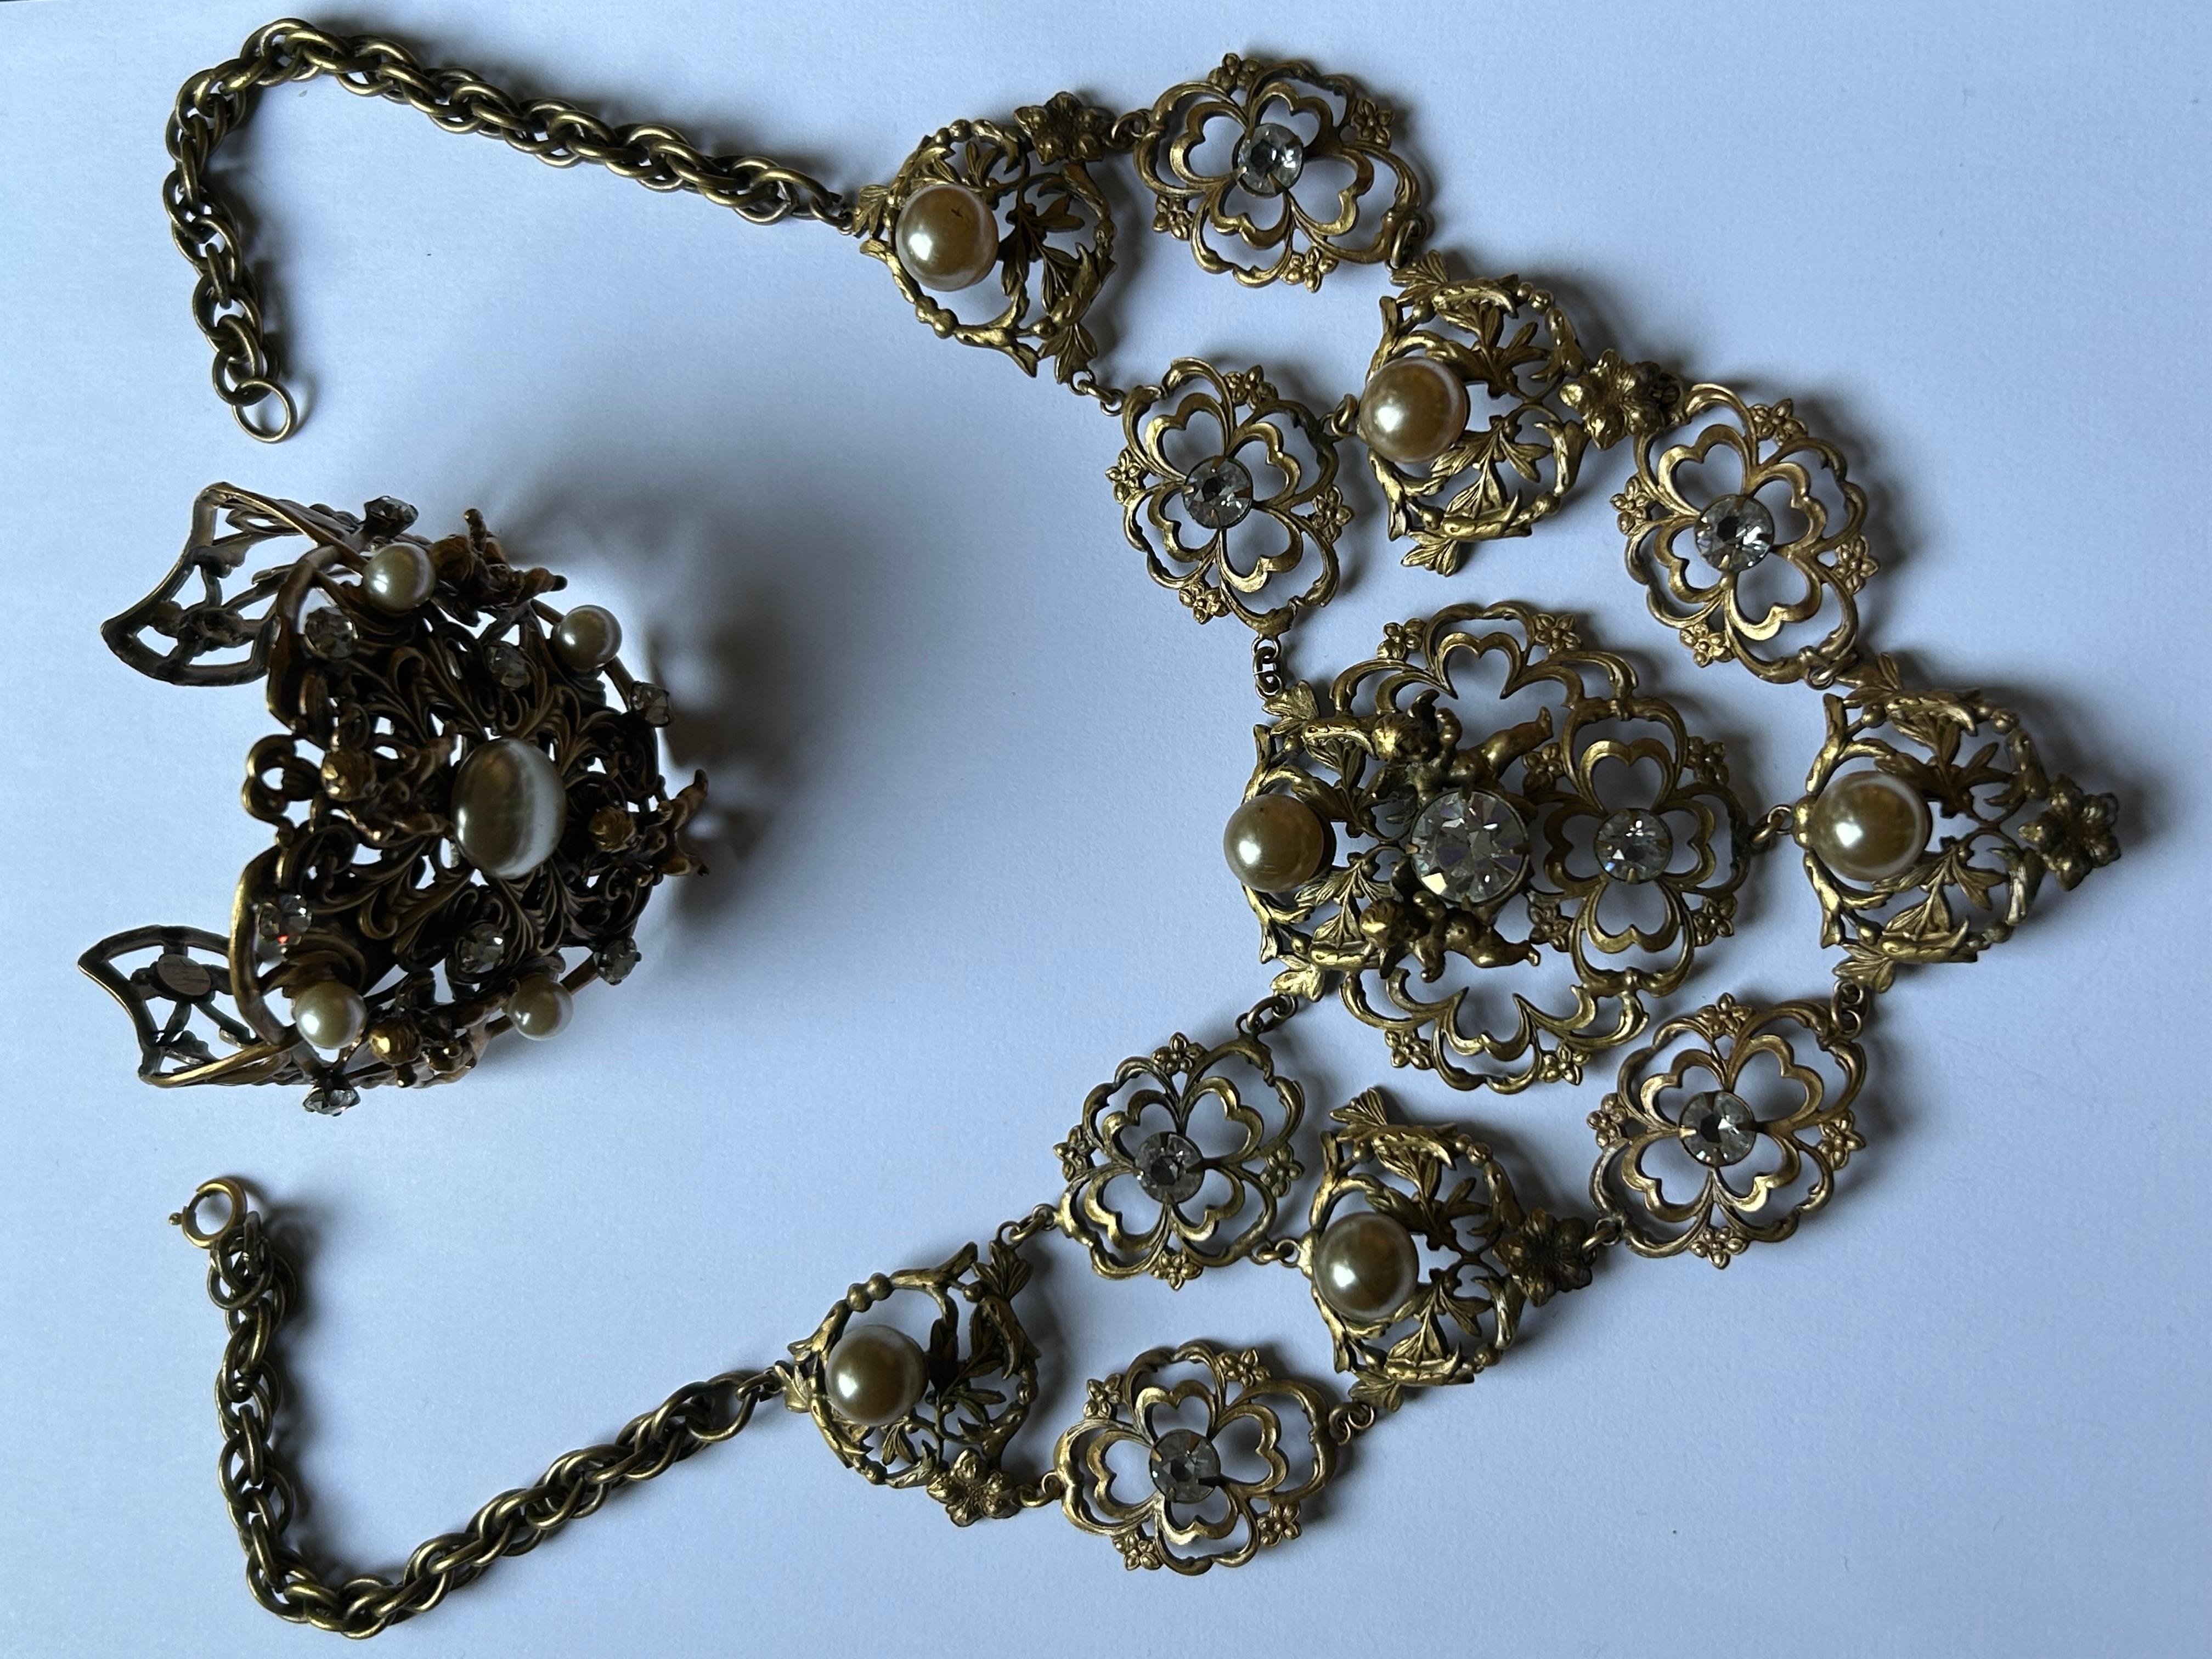 Vintage Joseff Of Hollywood Stunning Necklace And Bracelet rare Set.

Both pieces In aged gold metal finish . Some
Slight tarnishing here and there on the necklace. Some small marks on the faux pearls on necklace.

This is a truly magnificent 1950s